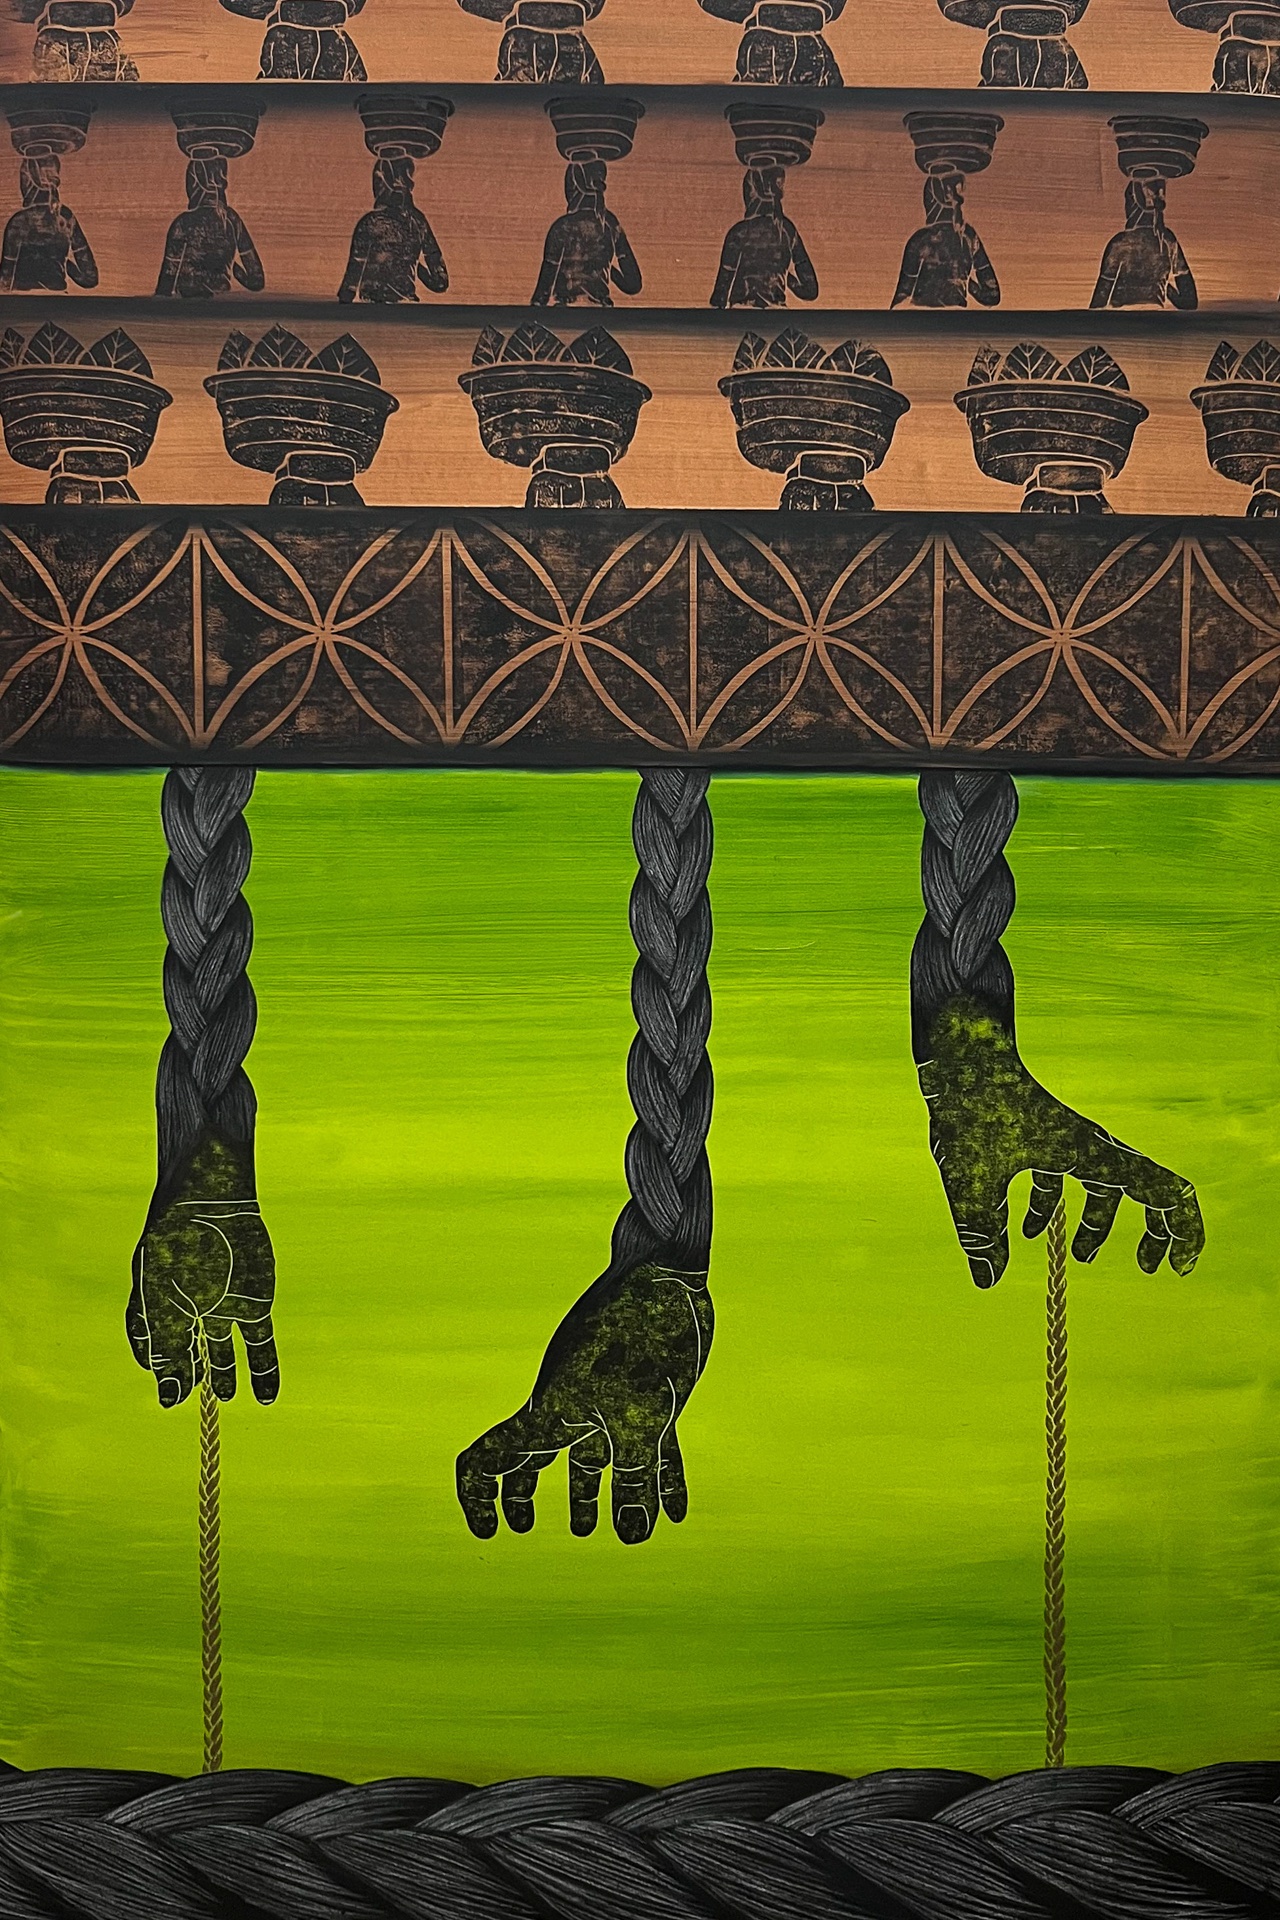 A painting showing three translucent black hands on braids reaching down towards a horizontal braid. Above are alternating wooden panels showing a woman walking with an empty basket on her head then returning with leaves in the basket.